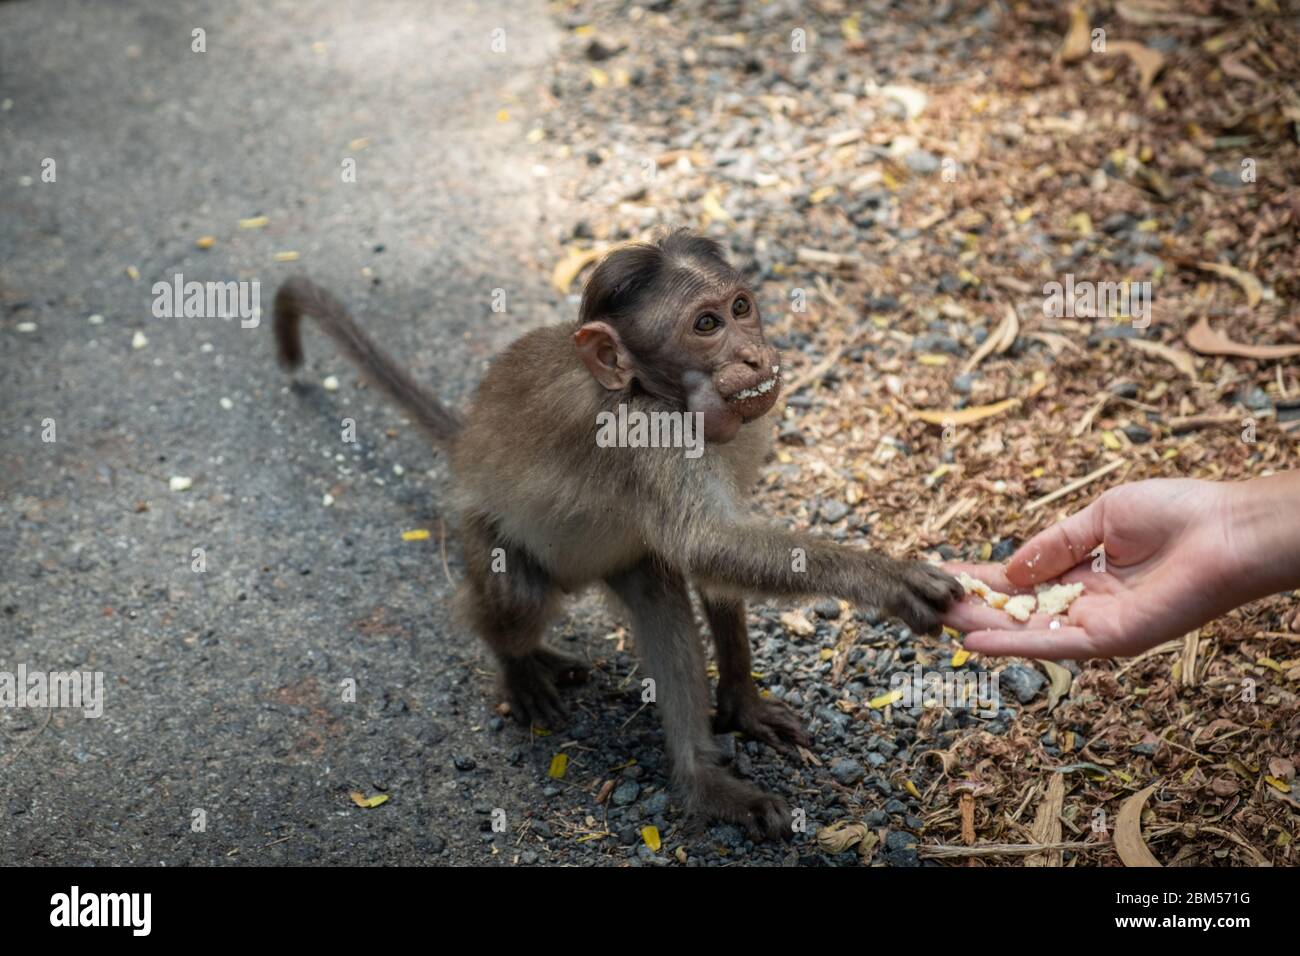 Ladies giving the food to the monkey in the jungle on the road. India, Goa. Body part Stock Photo